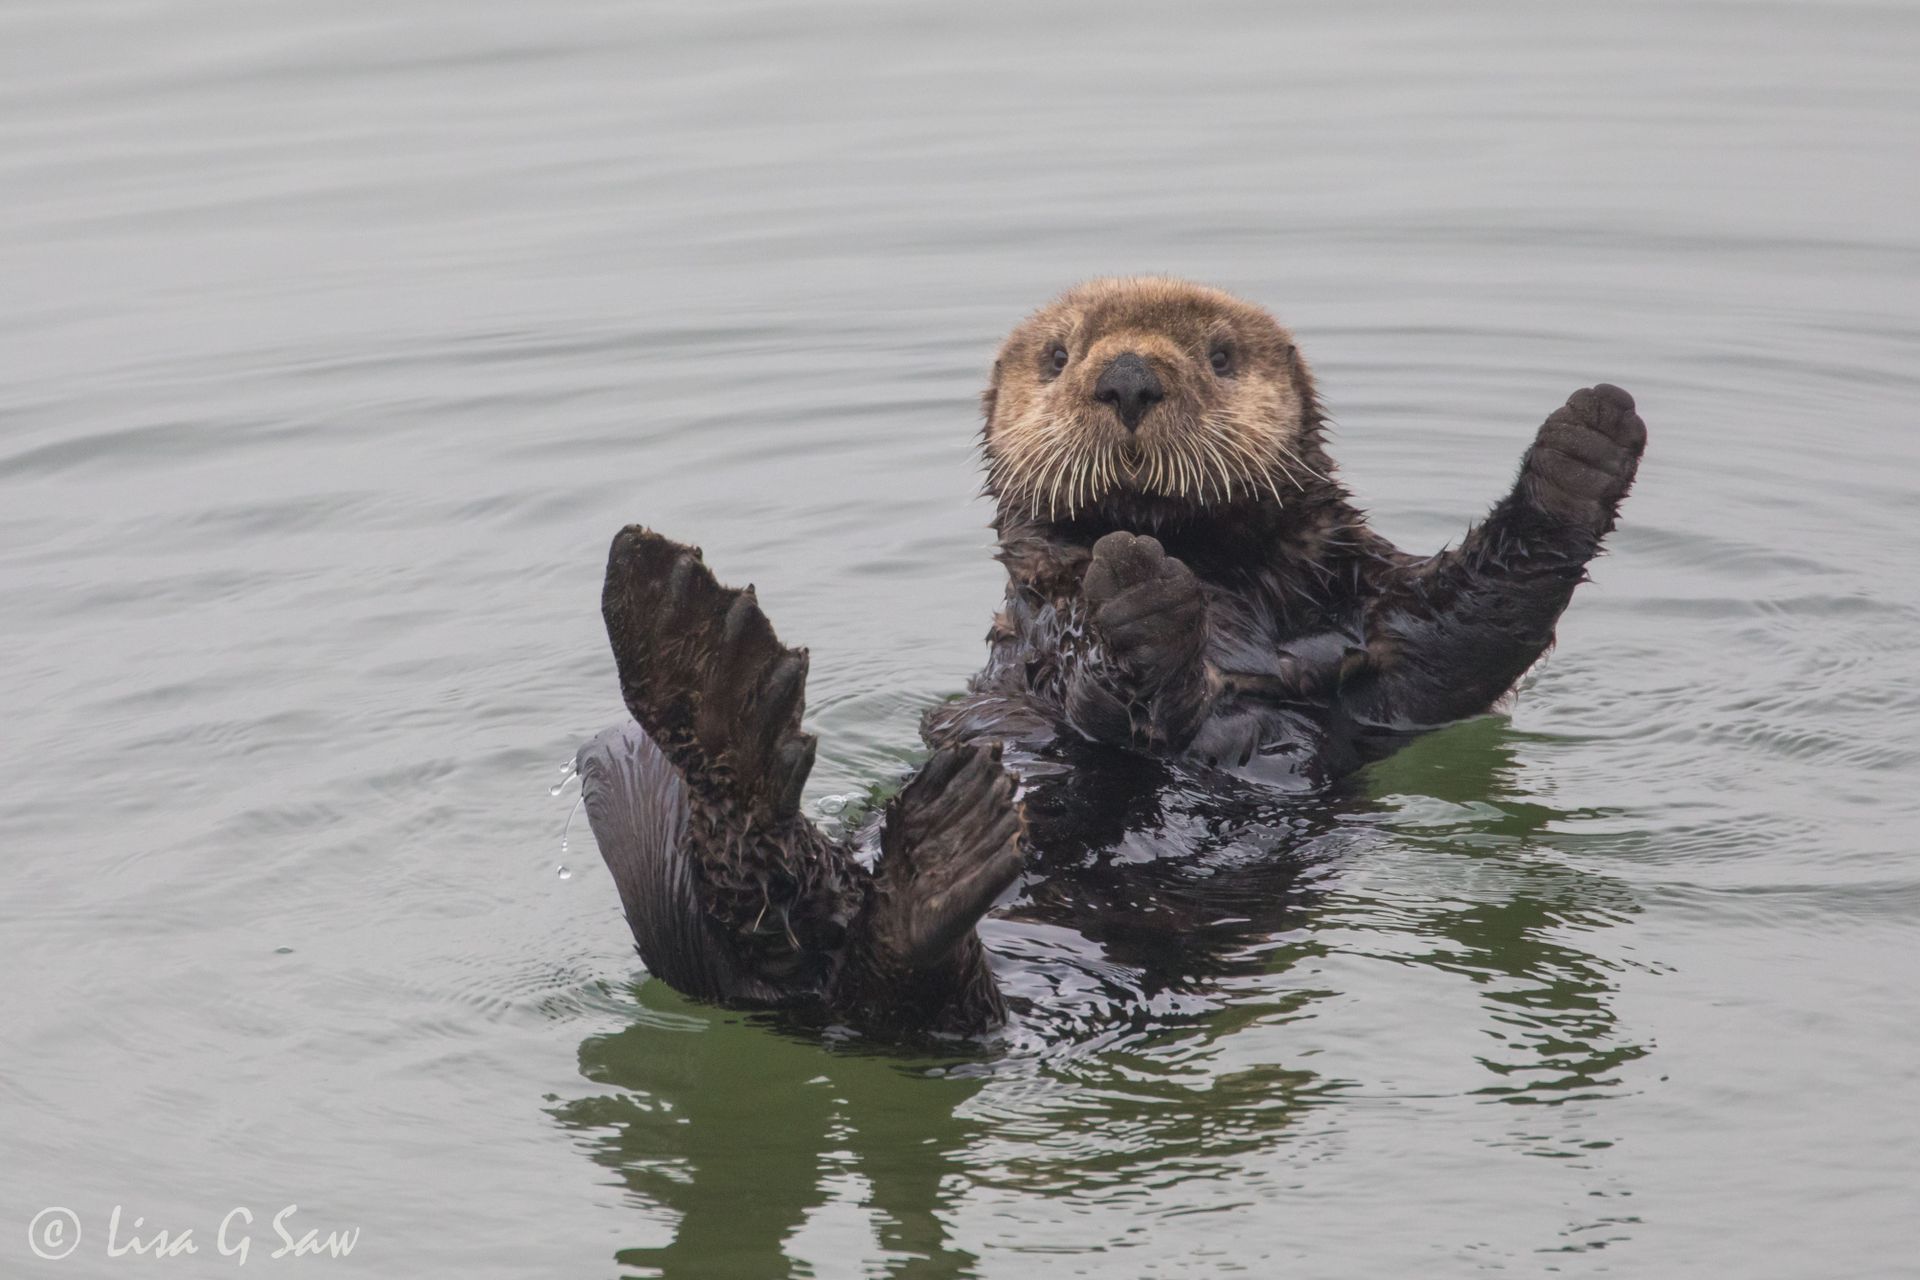 Sea Otter with paws up in water, Monterrey, USA